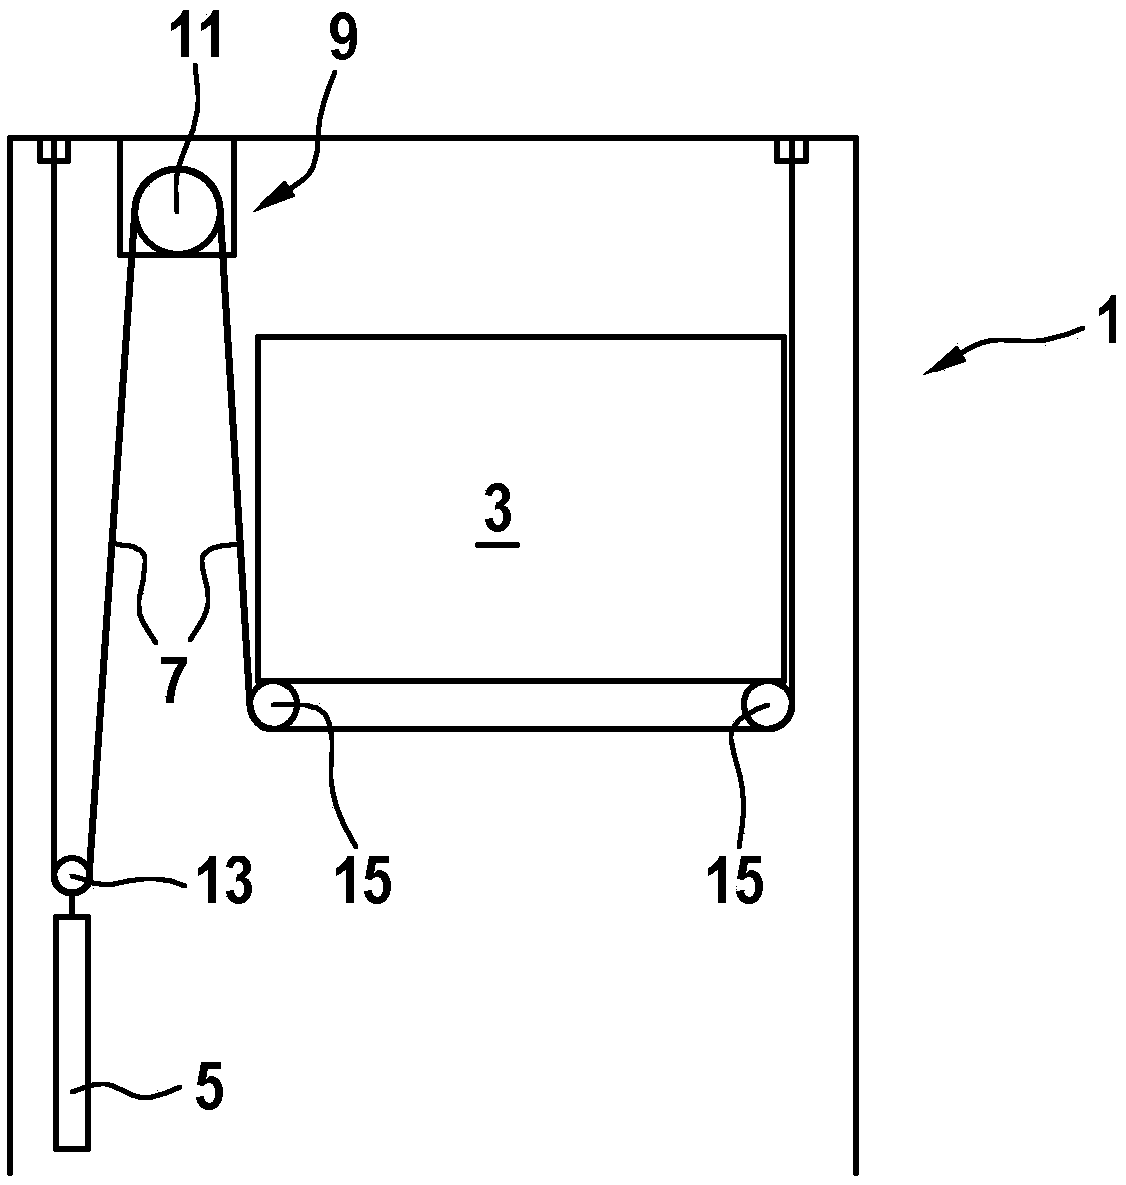 Pulley for an elevator with a friction reducing coating and method for manufacturing same